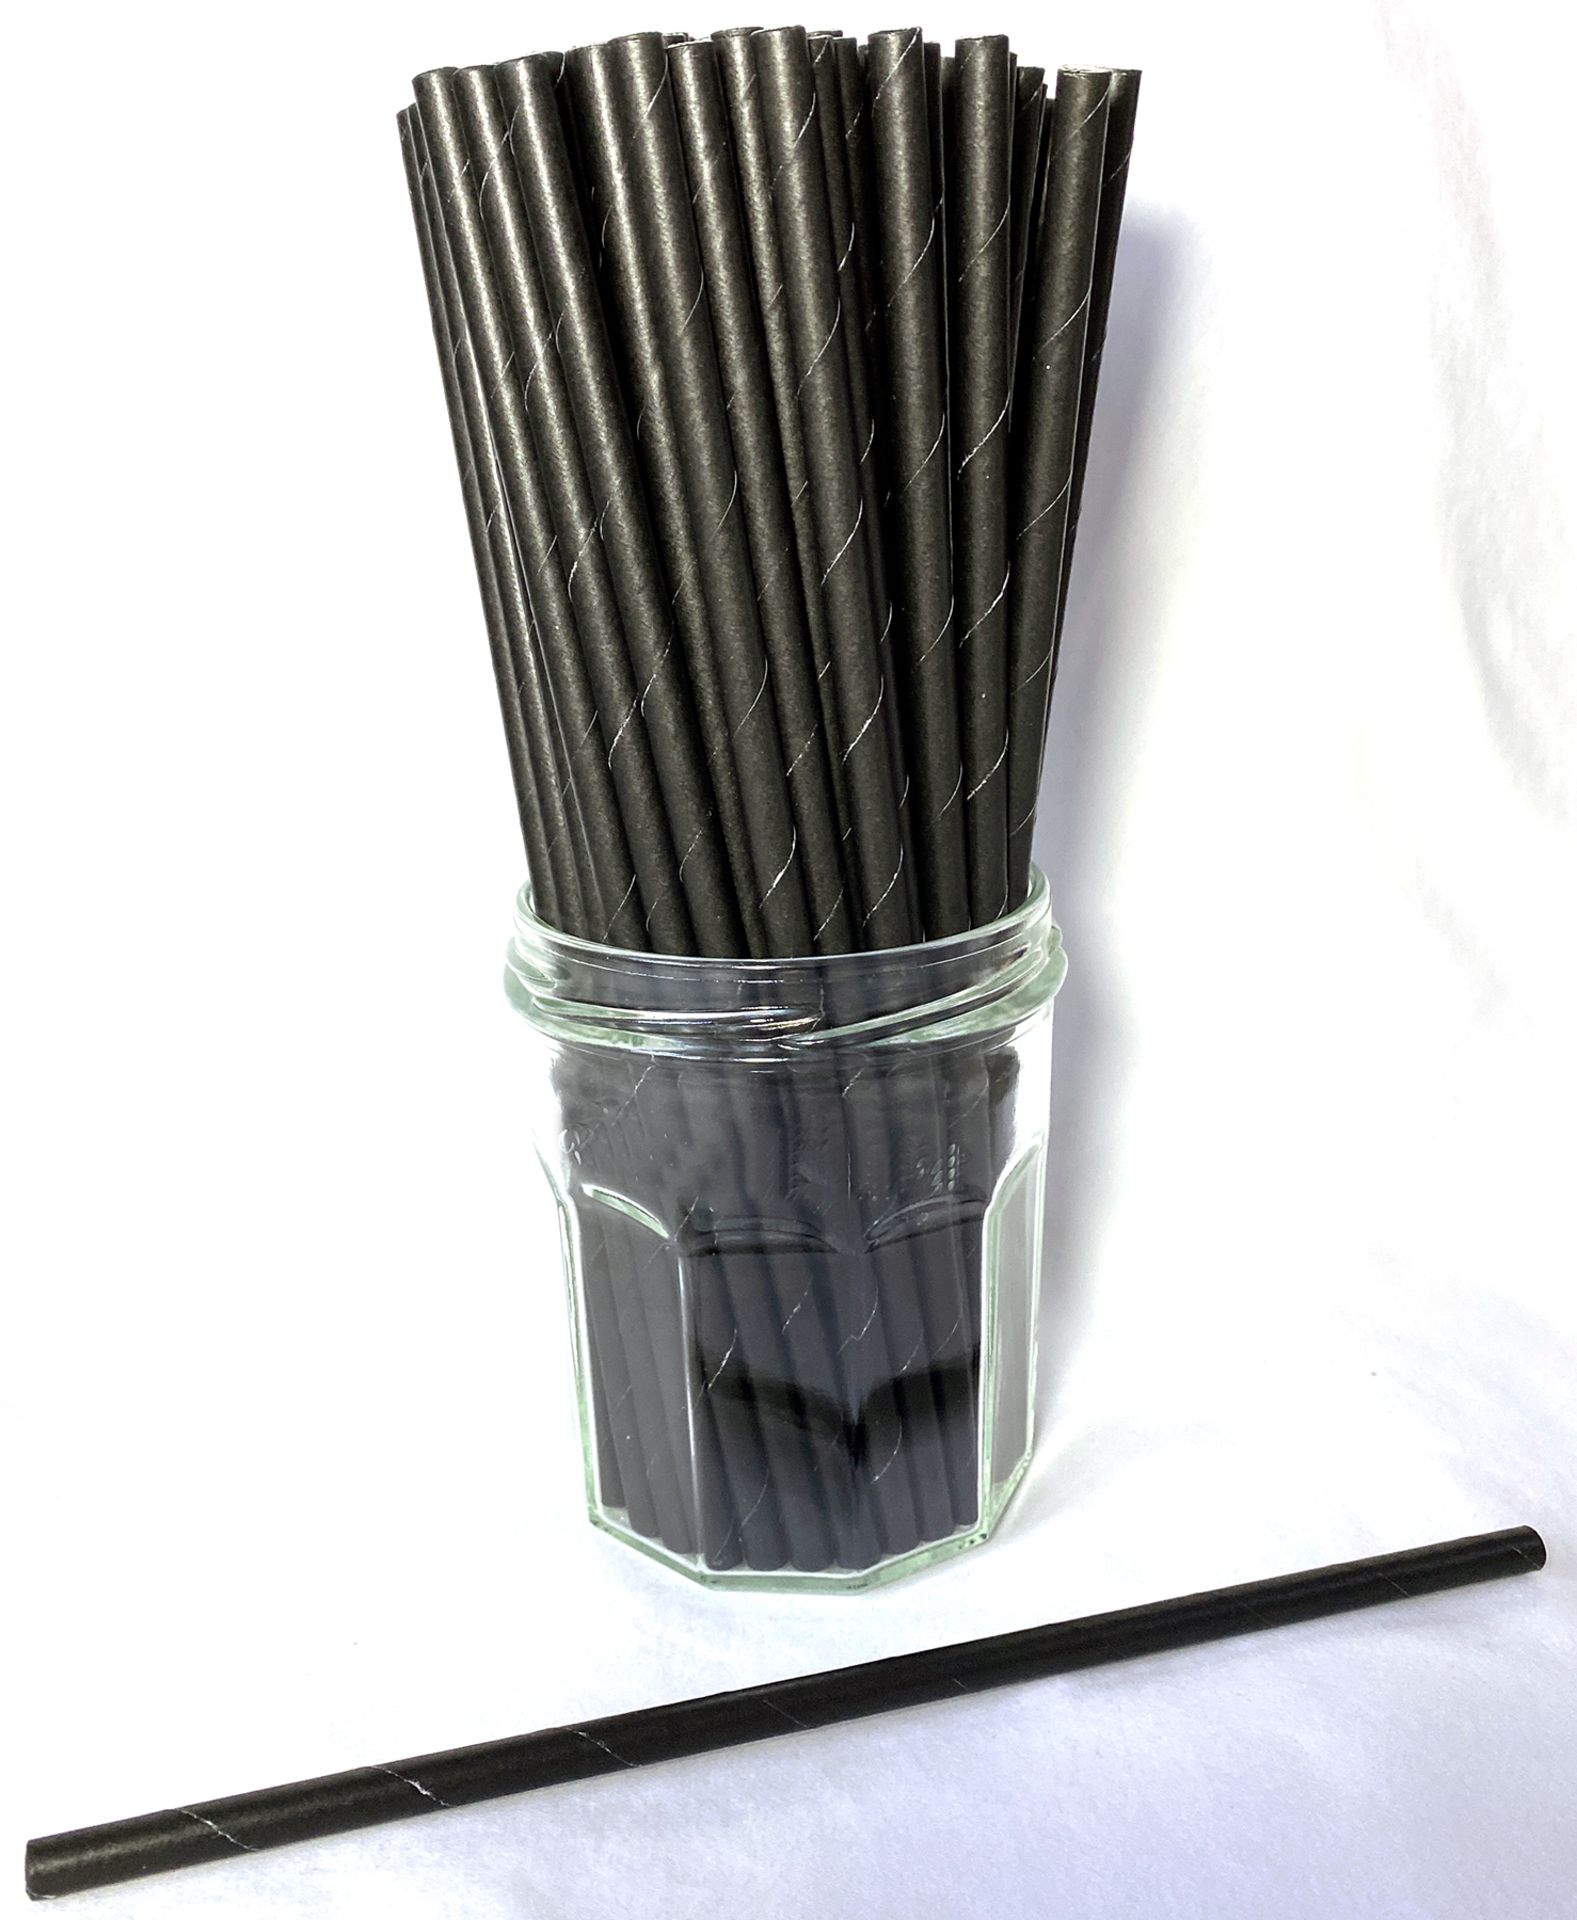 2 x Boxes of Biodegradable Jumbo Straws by 888 Gastro Disposables | DSP51 - Bild 2 aus 4